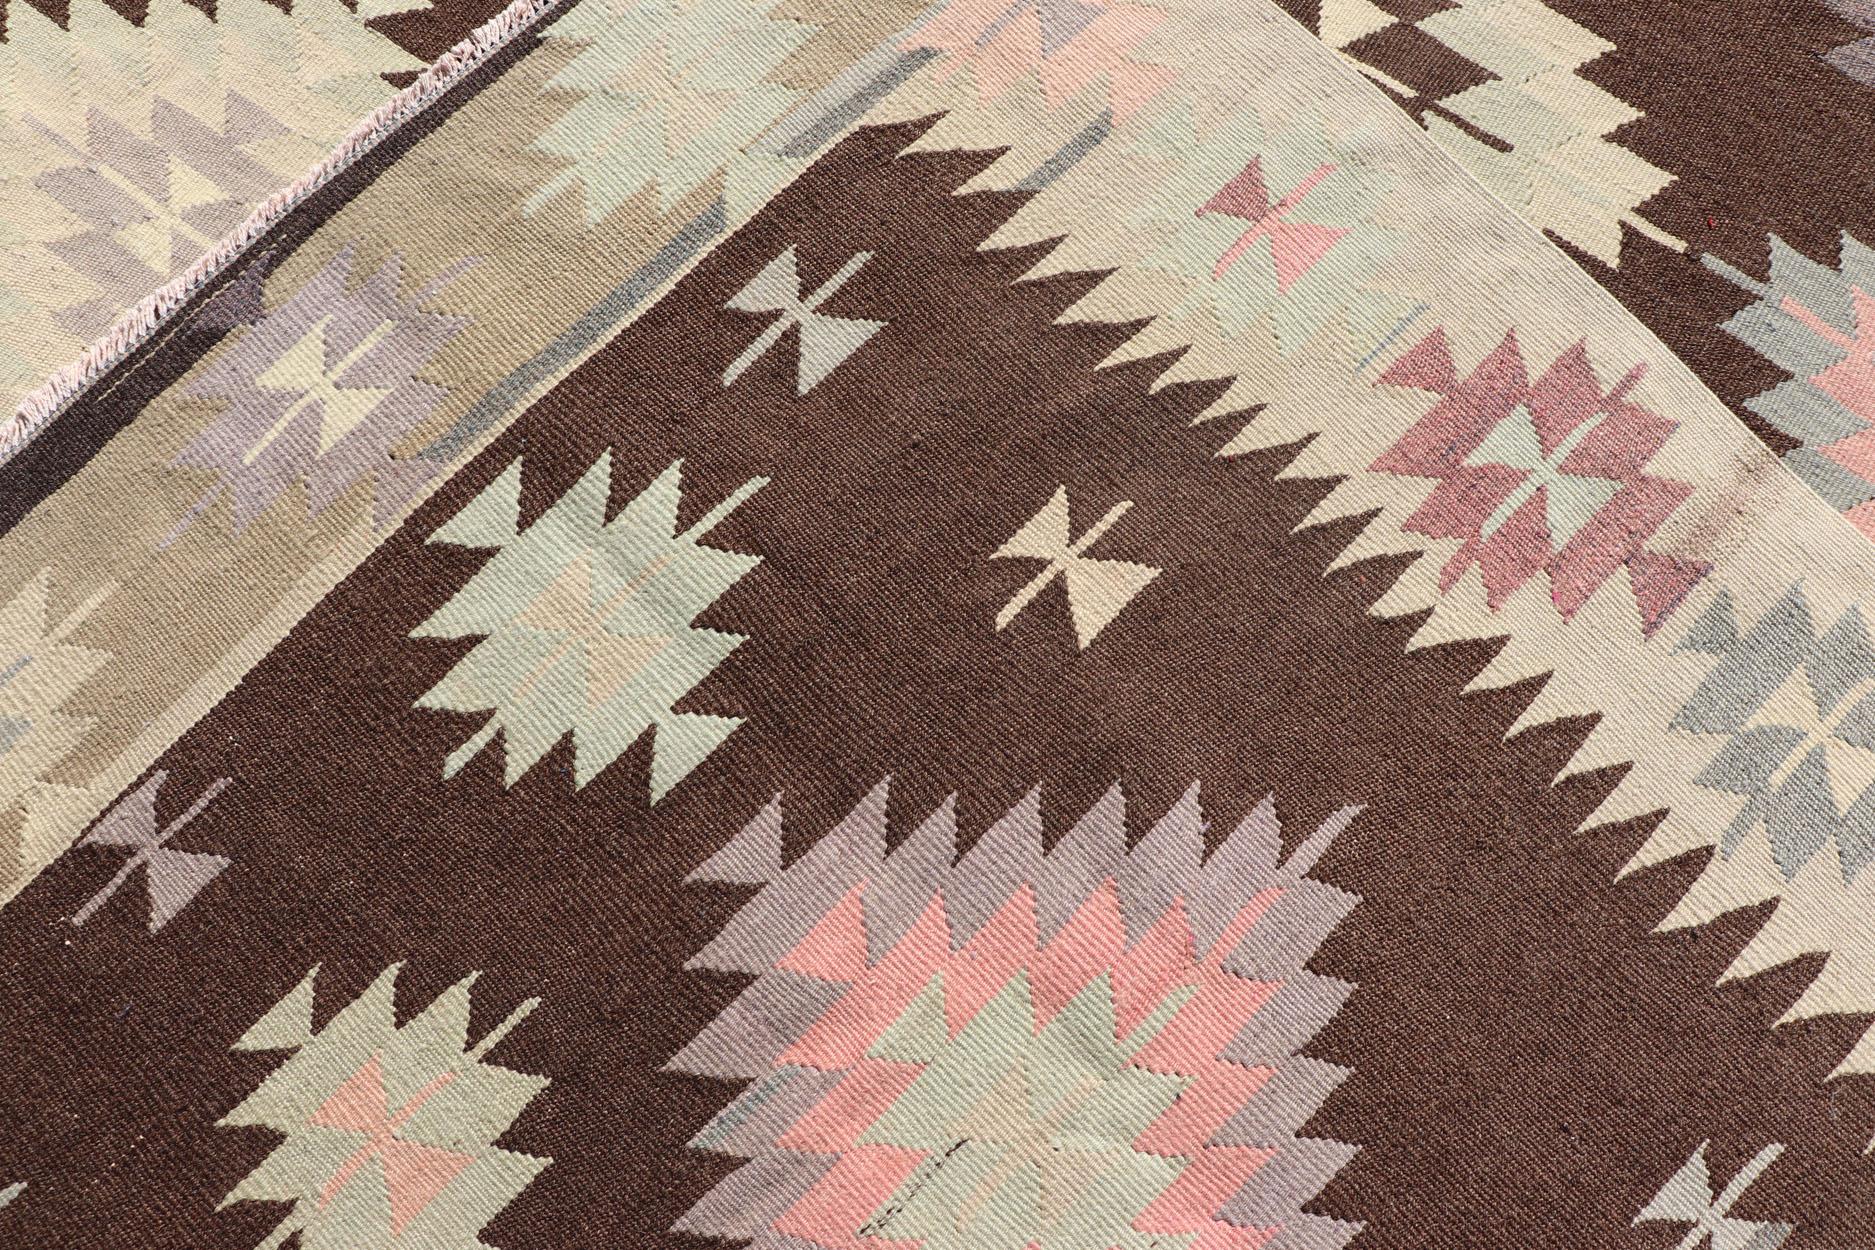 Wool Tribal and Geometrics Turkish Kilim in Brown with Cream, Pink, Light Gray/Blue For Sale